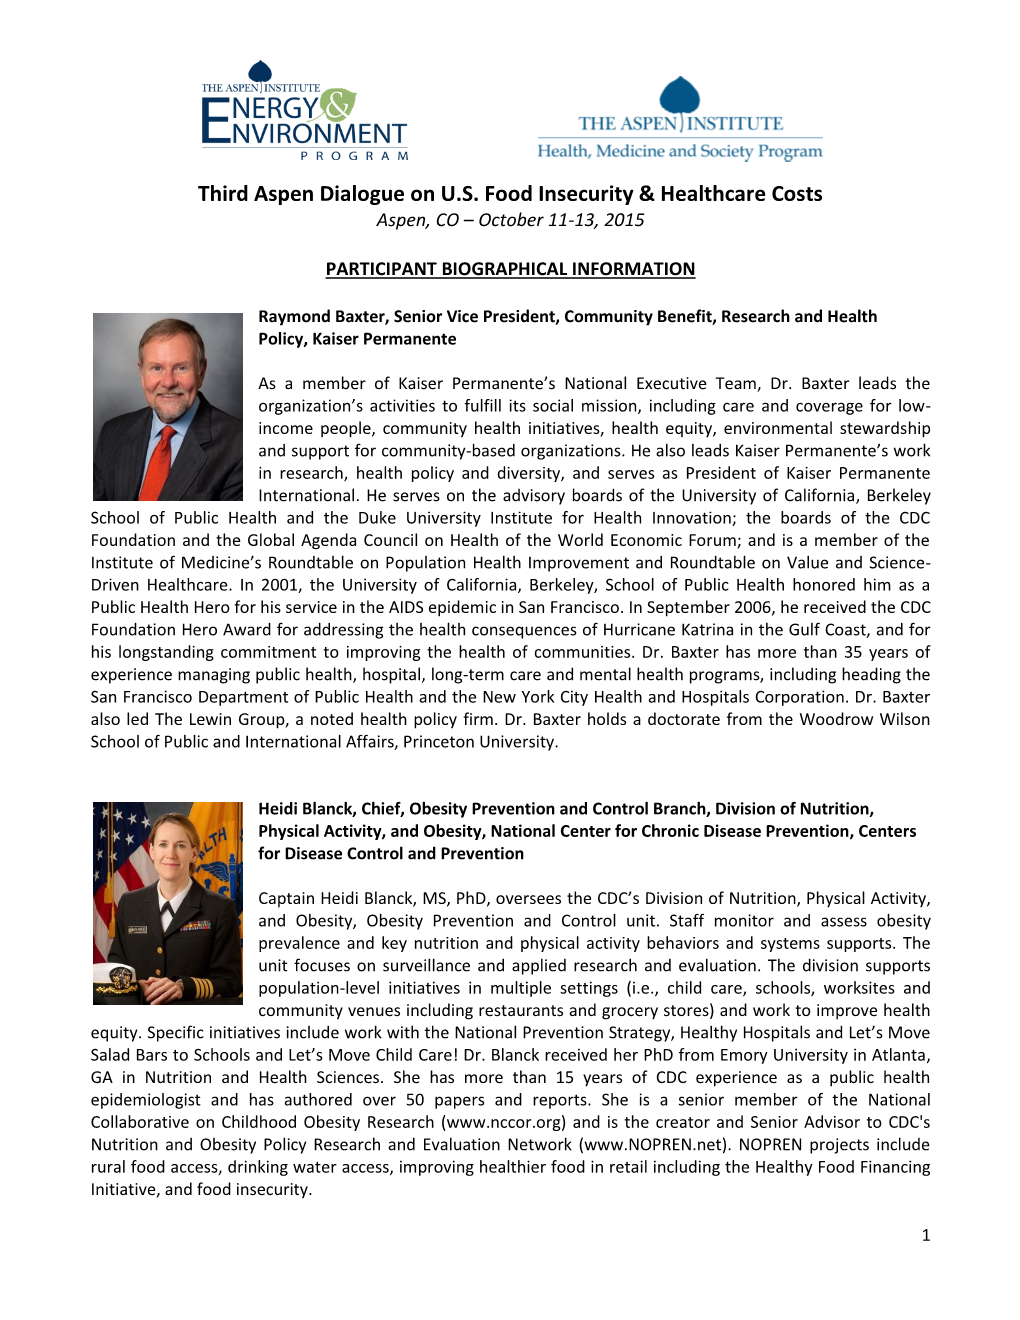 Third Aspen Dialogue on U.S. Food Insecurity & Healthcare Costs